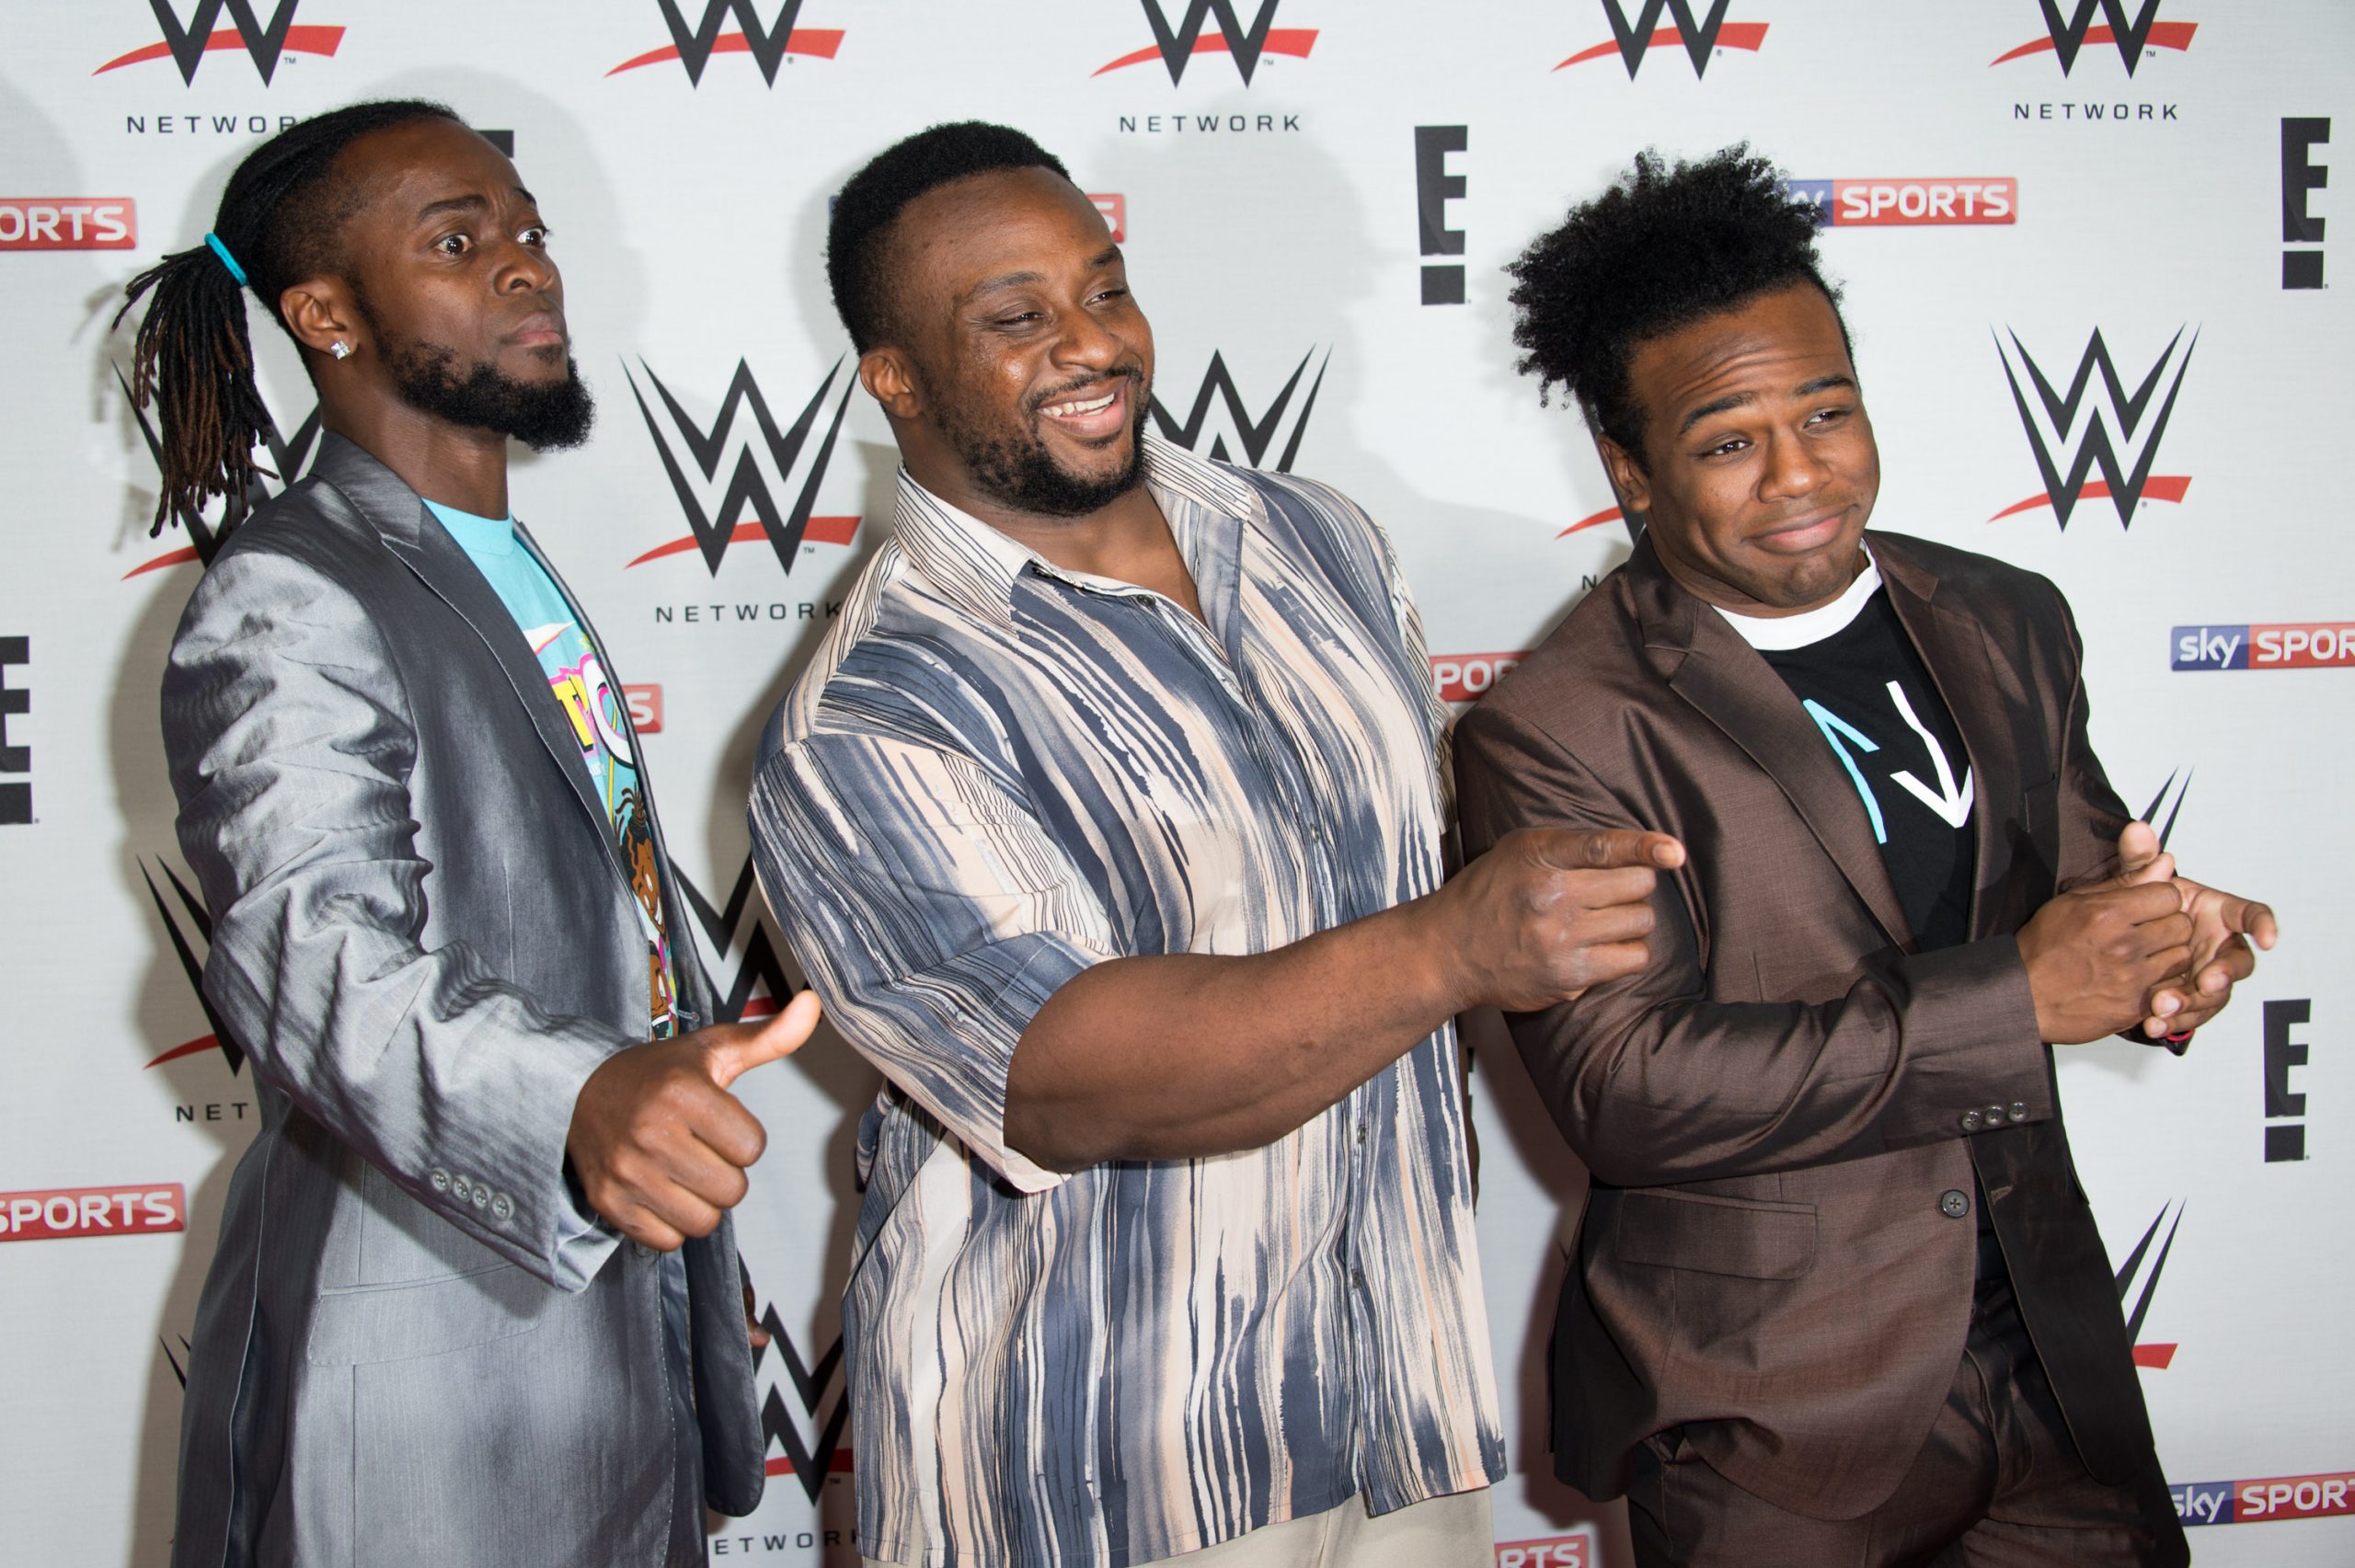 The New Day de WWE